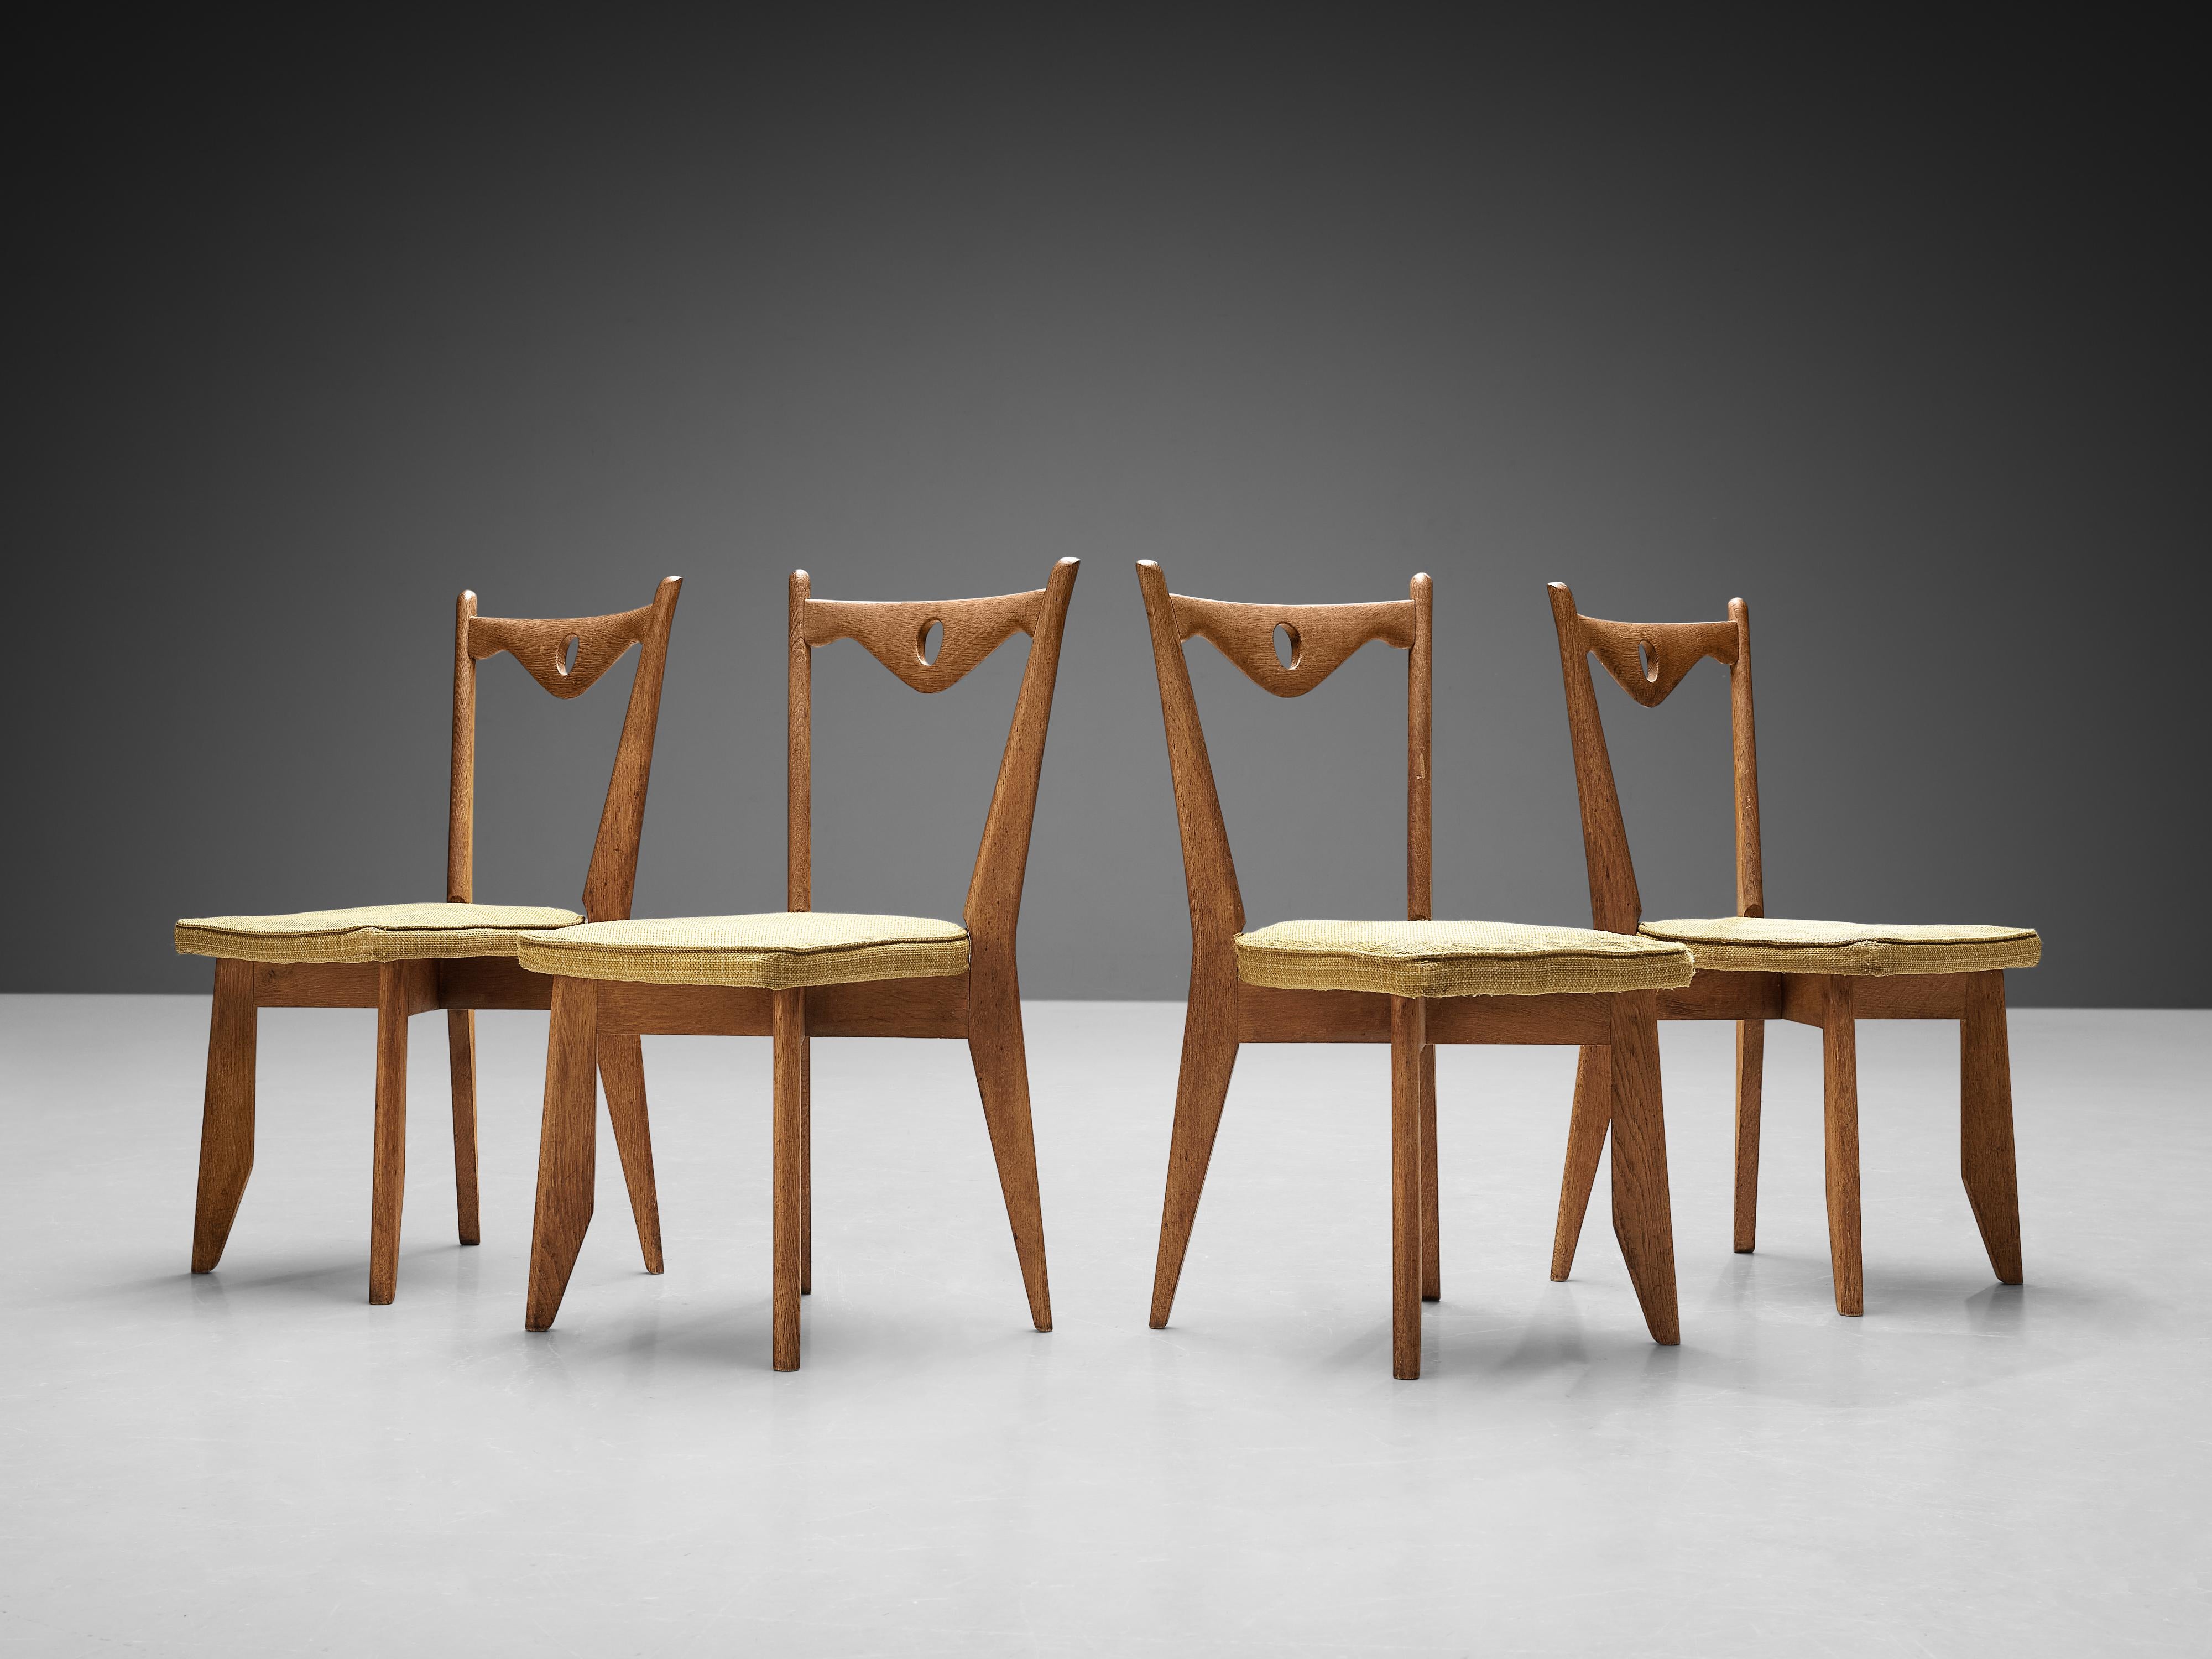 Guillerme et Chambron for Votre Maison, set of four 'Thibault' dining chairs, oak, wool, France, 1960s.

These chairs have characteristic frames with tapered legs and a sculptural back with a scalloped backrest finished with a hole in the middle.